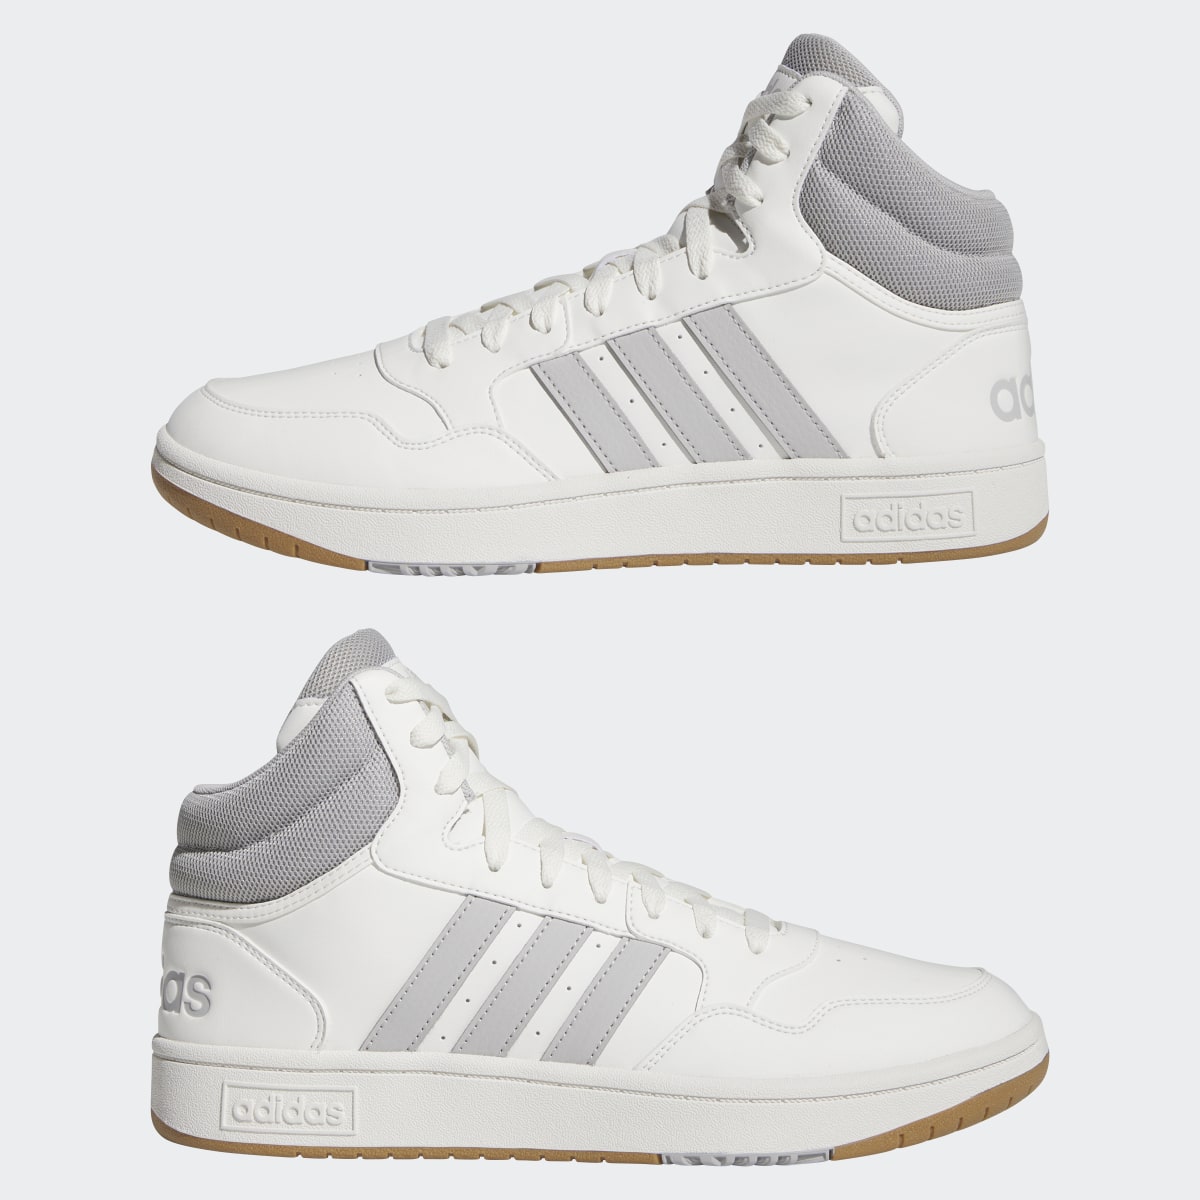 Adidas Hoops 3.0 Mid Lifestyle Basketball Classic Vintage Schuh. 8